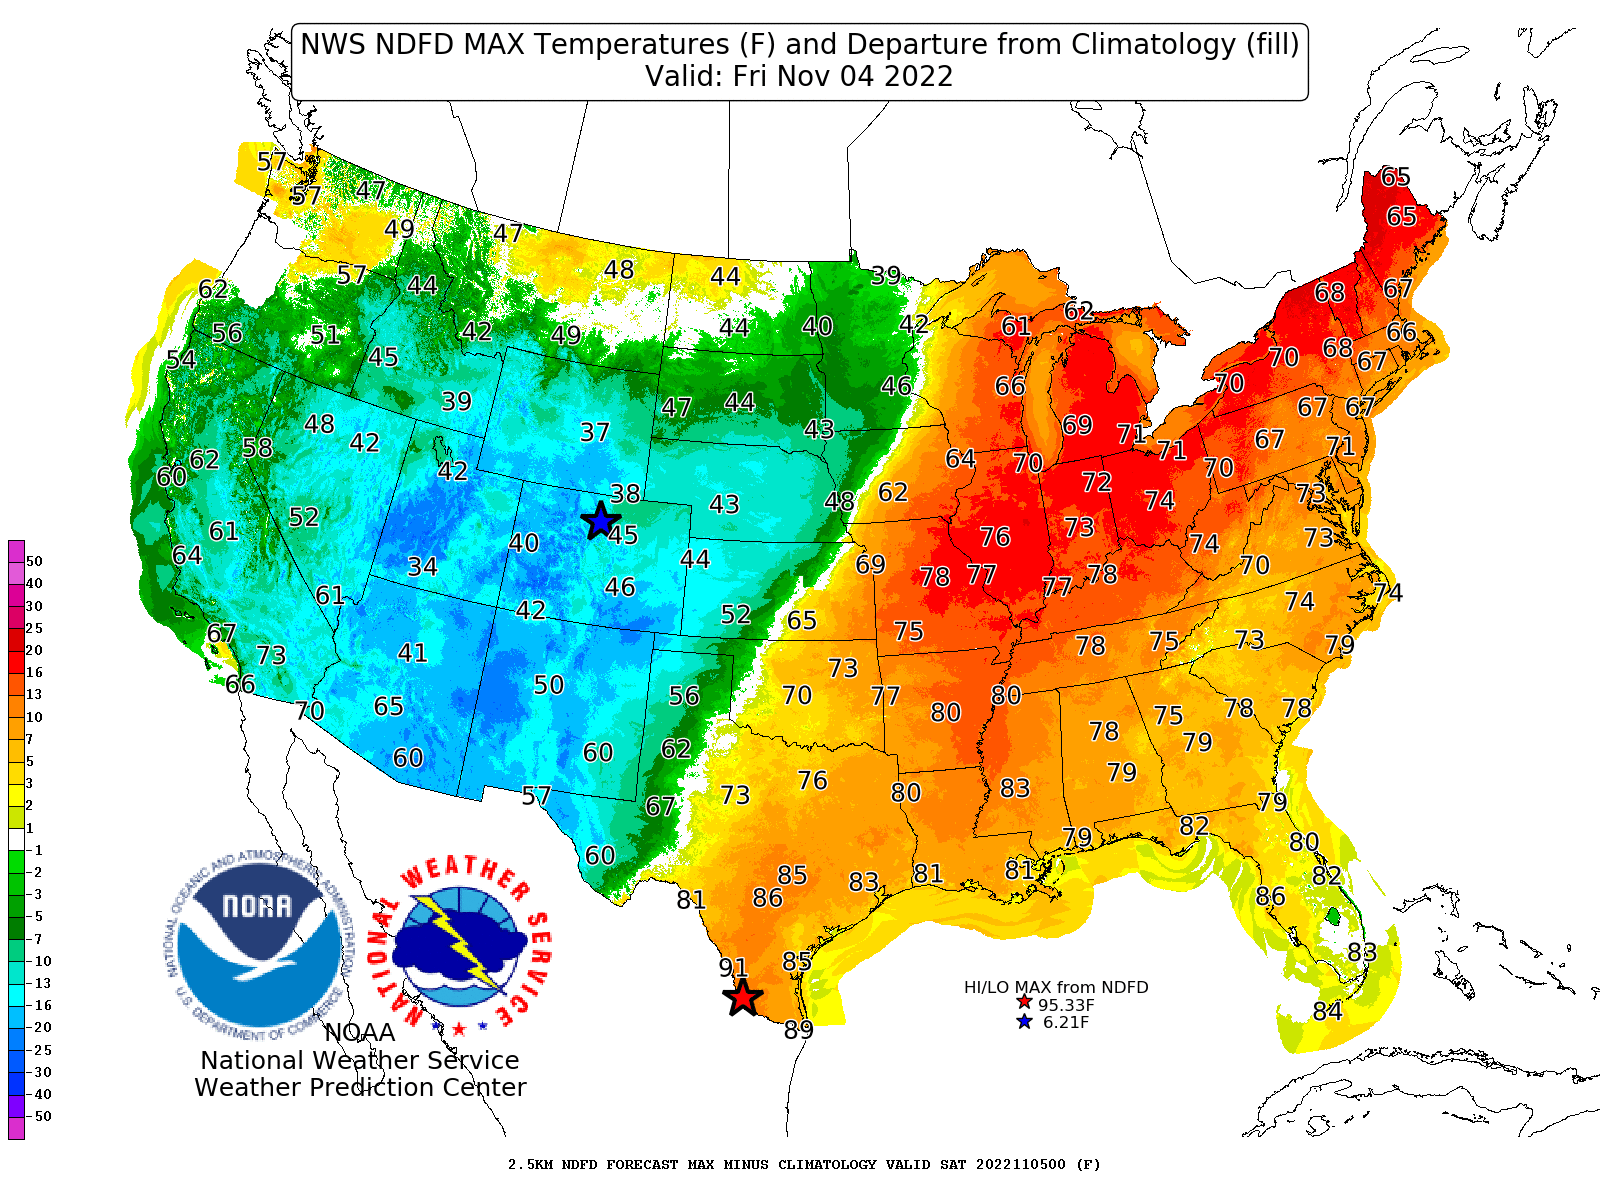 High temperature forecast and departures from average for Friday, November 2, 2022